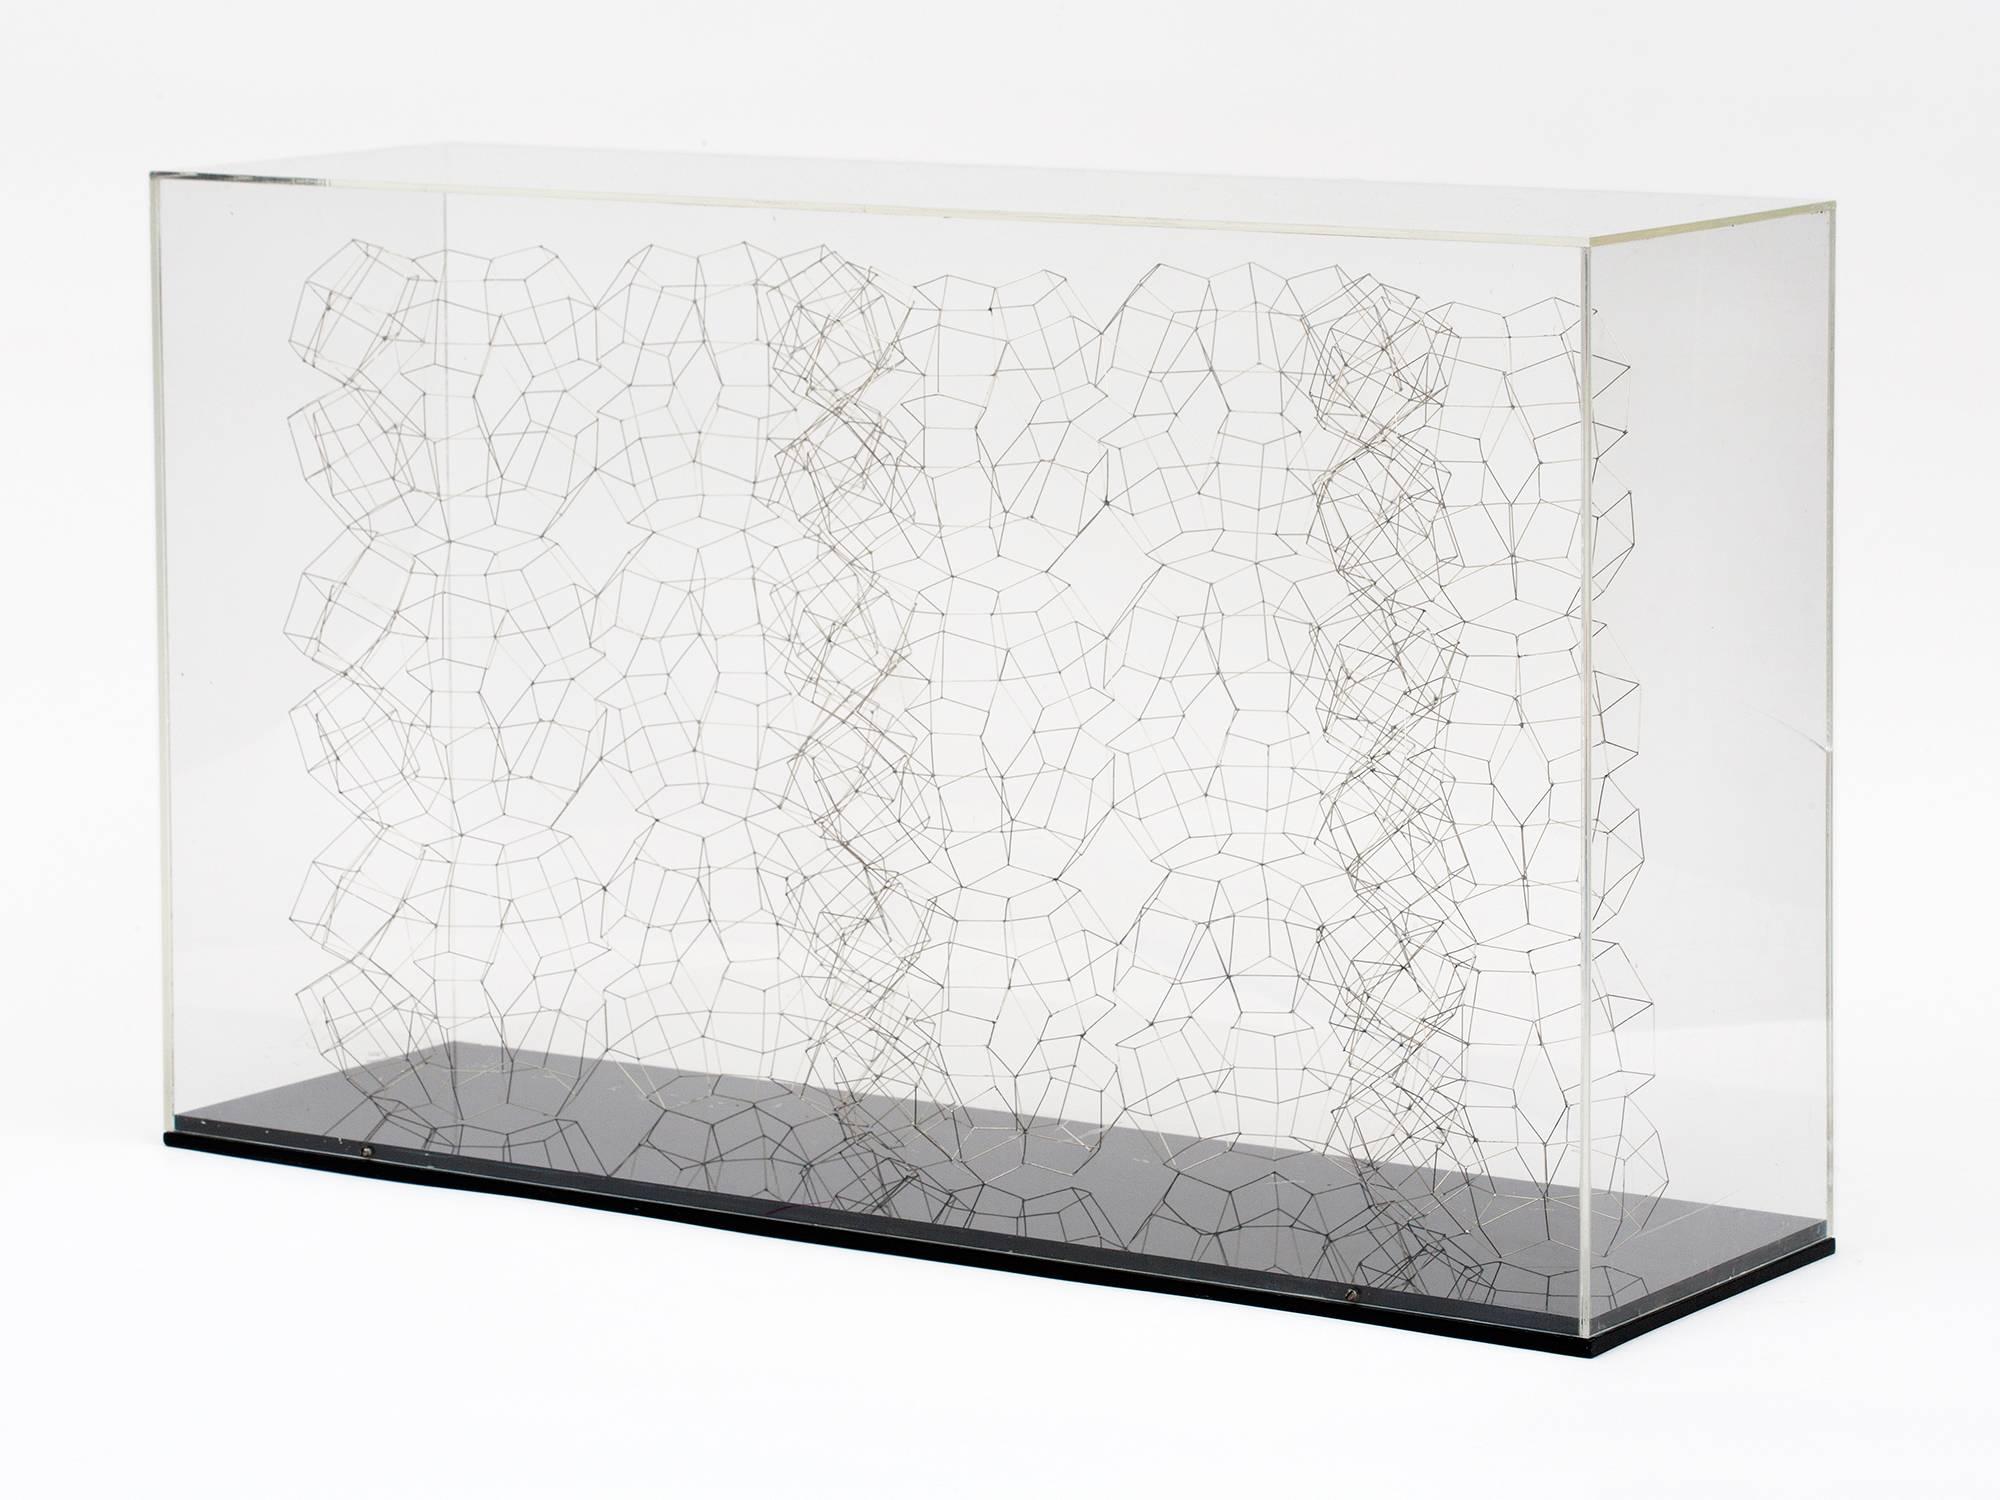 Intricate soldered wire geometric tabletop sculpture by Marilynn Gelfman-Karp, incased in a plexiglass box. Signed M. Gelfman Pereira. Marilyn Gelfman-Karp (b. 1939) is an American artist, gallerist, author and professor. An avid collector of